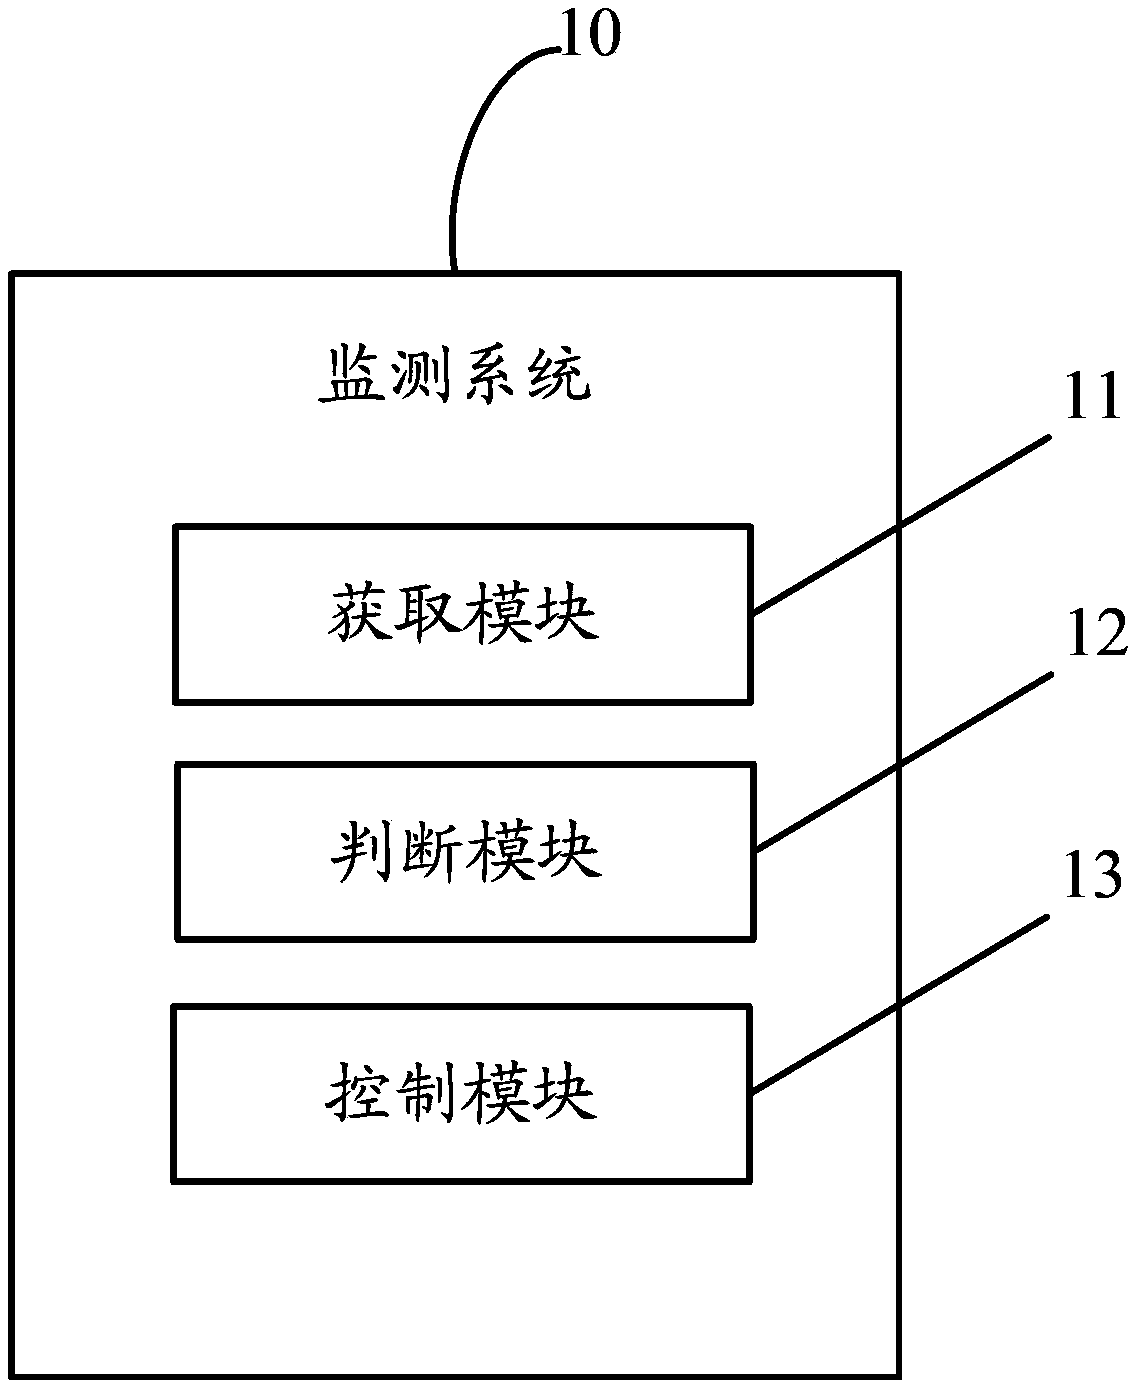 Gas monitoring system and method